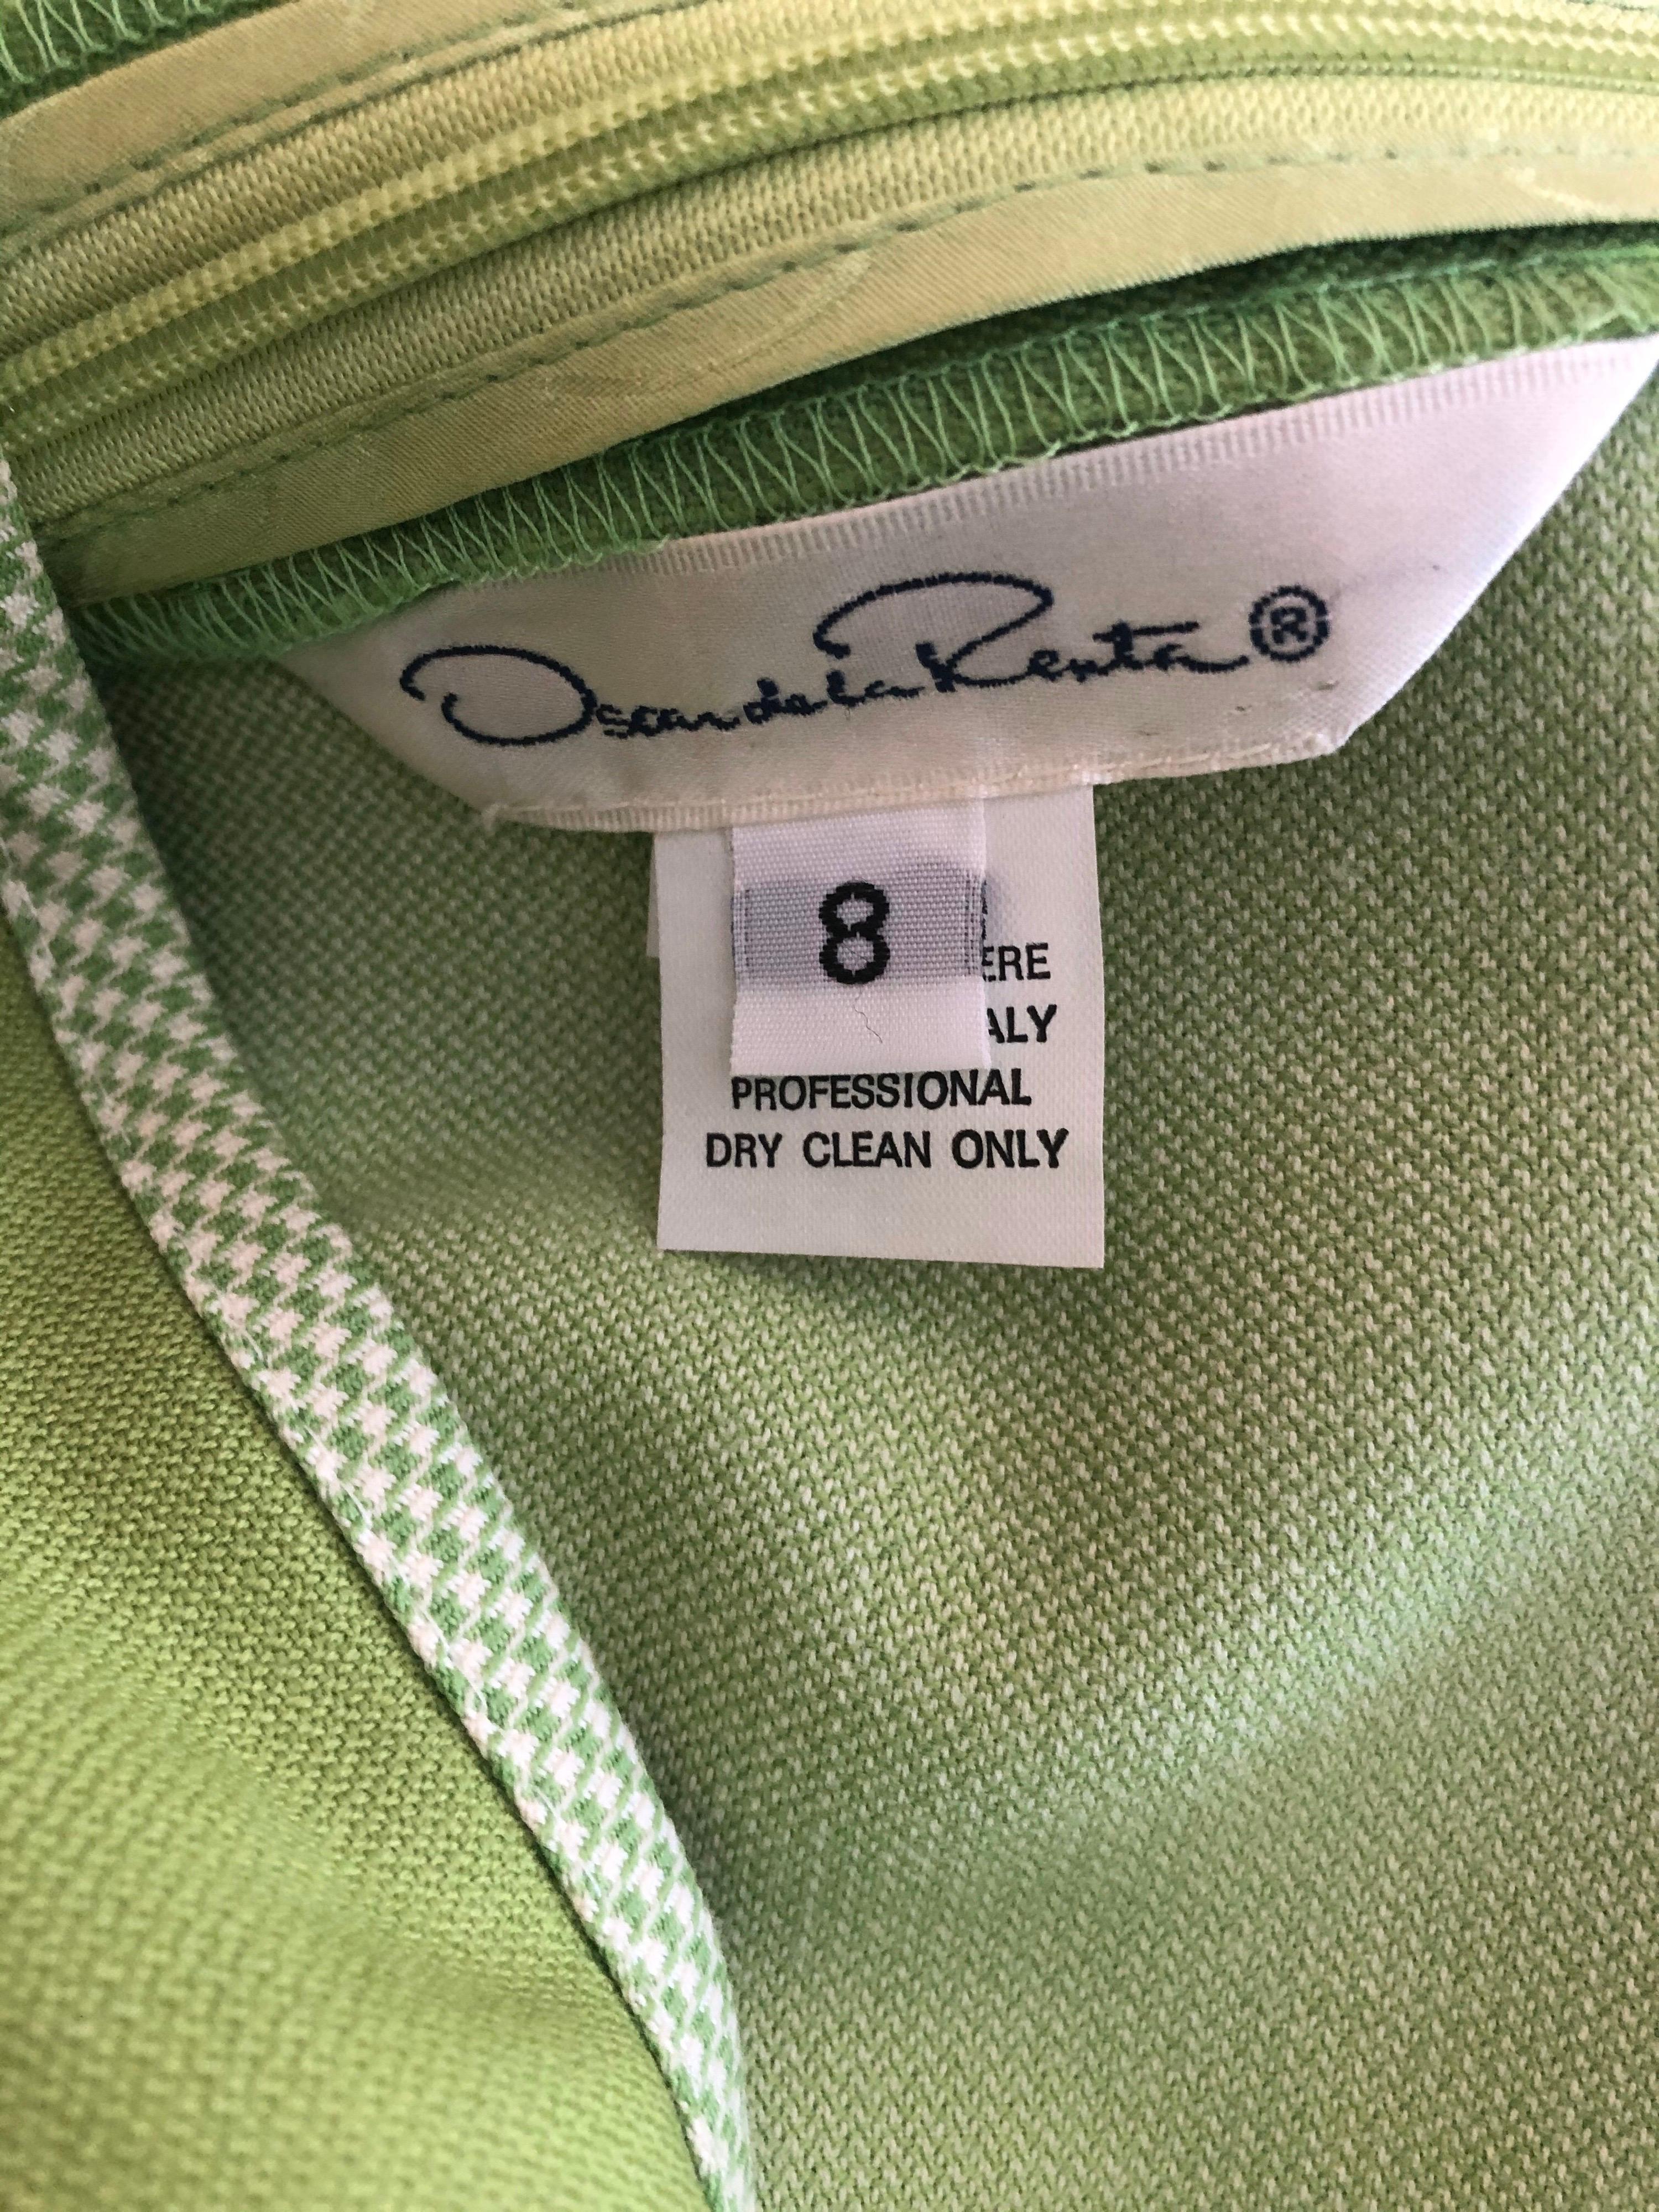 Chic and effortless vintage late 90s OSCAR DE LA RENTA lime green sheath dress! Features four panels of lime green and white gingham down the front and two down the back, and around the beck. Hidden zipper up the back with hook-and-eye closure. Can